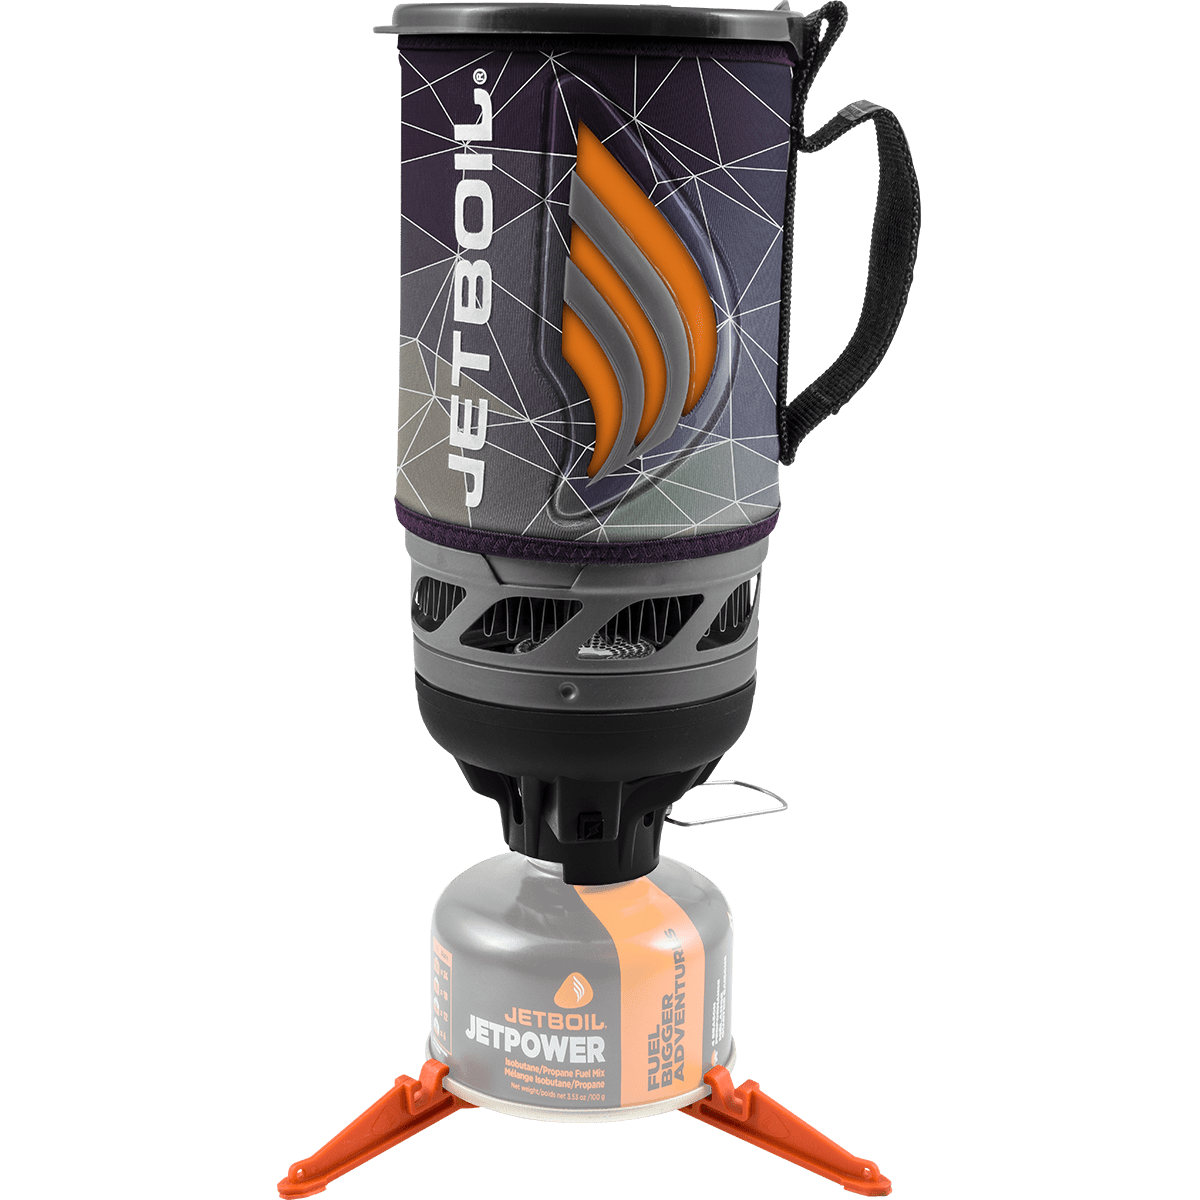 Jetboil FLASH 2.0 Cooking System 2020 Model Lightweight Premium Camping Stove 